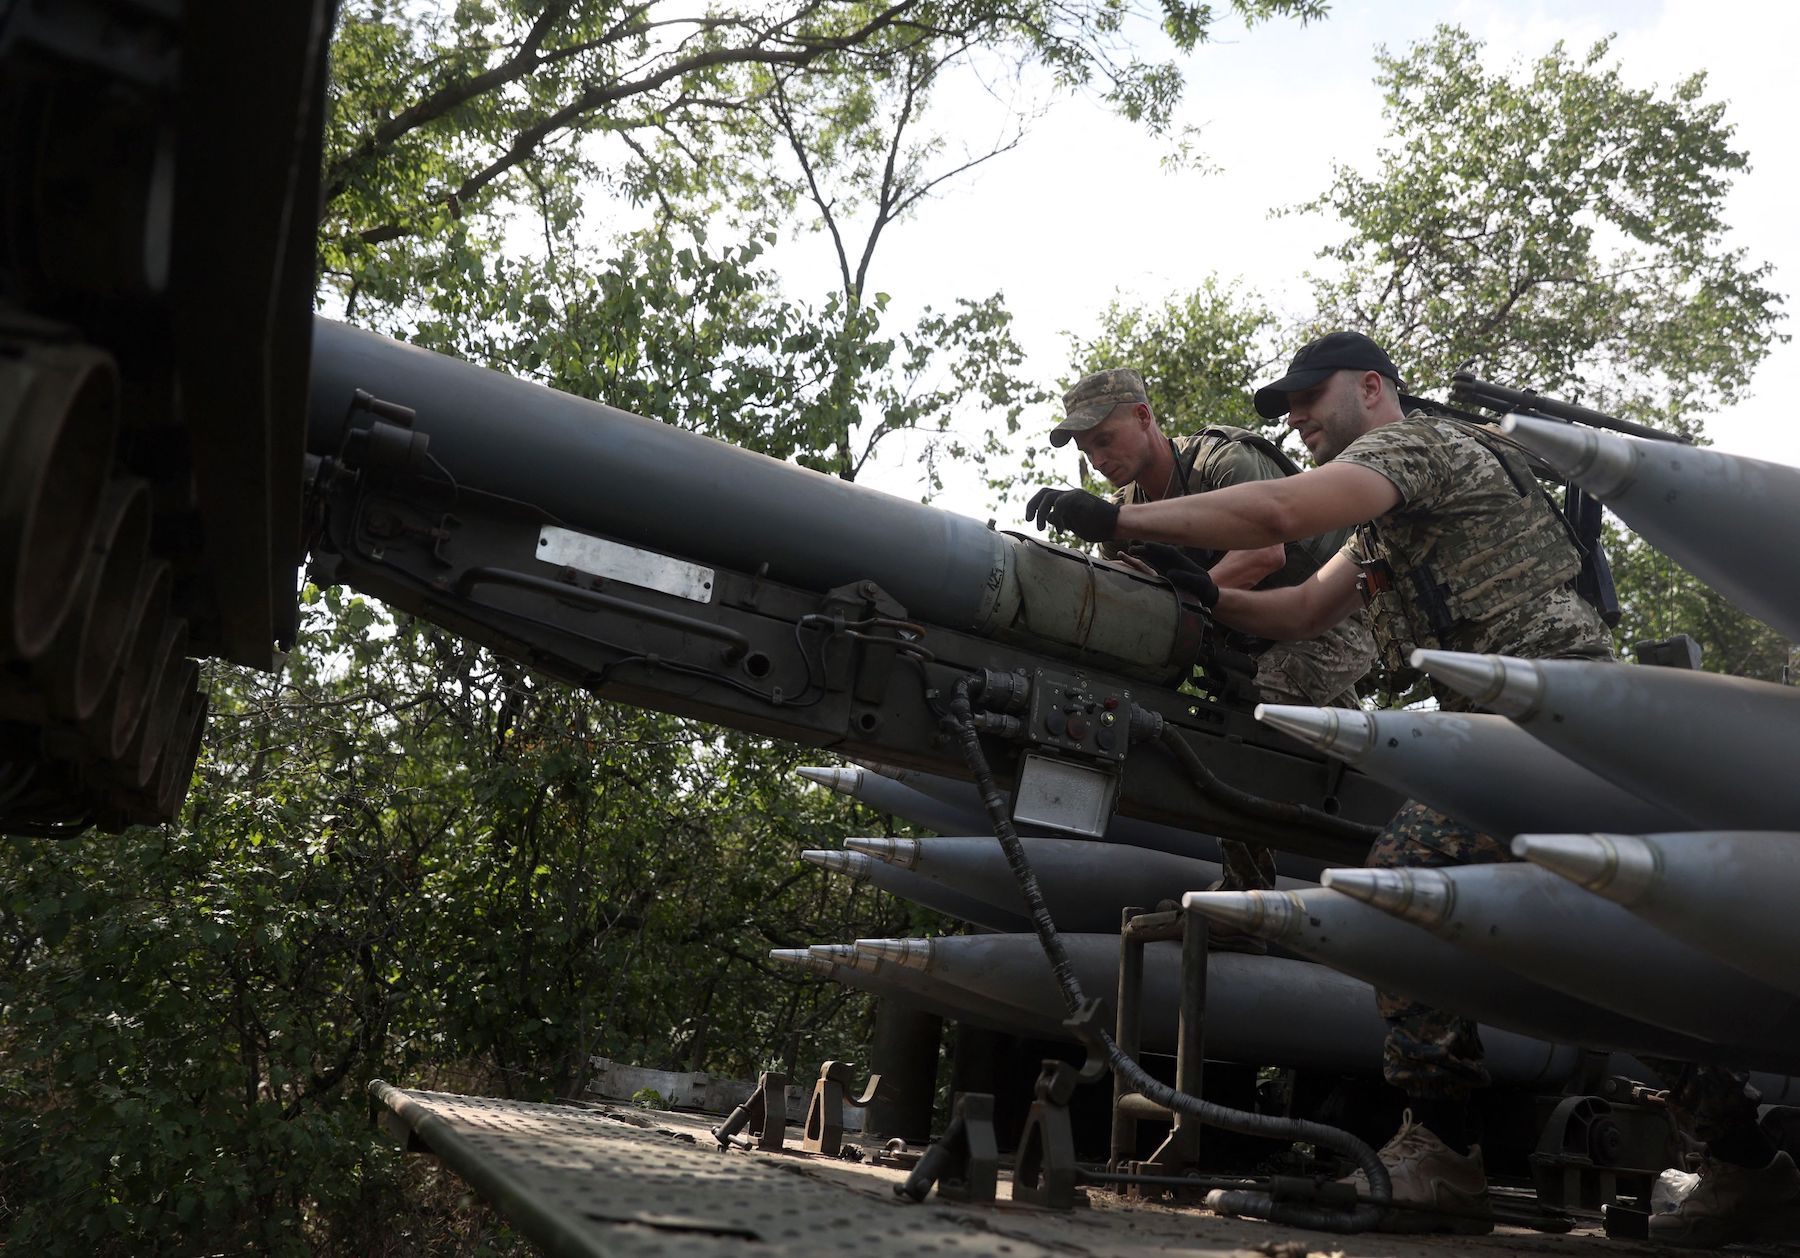 Ukrainian gunners prepare to fire multiple self-propelled rocket launchers at a position near the front line in the Donetsk region on August 27.